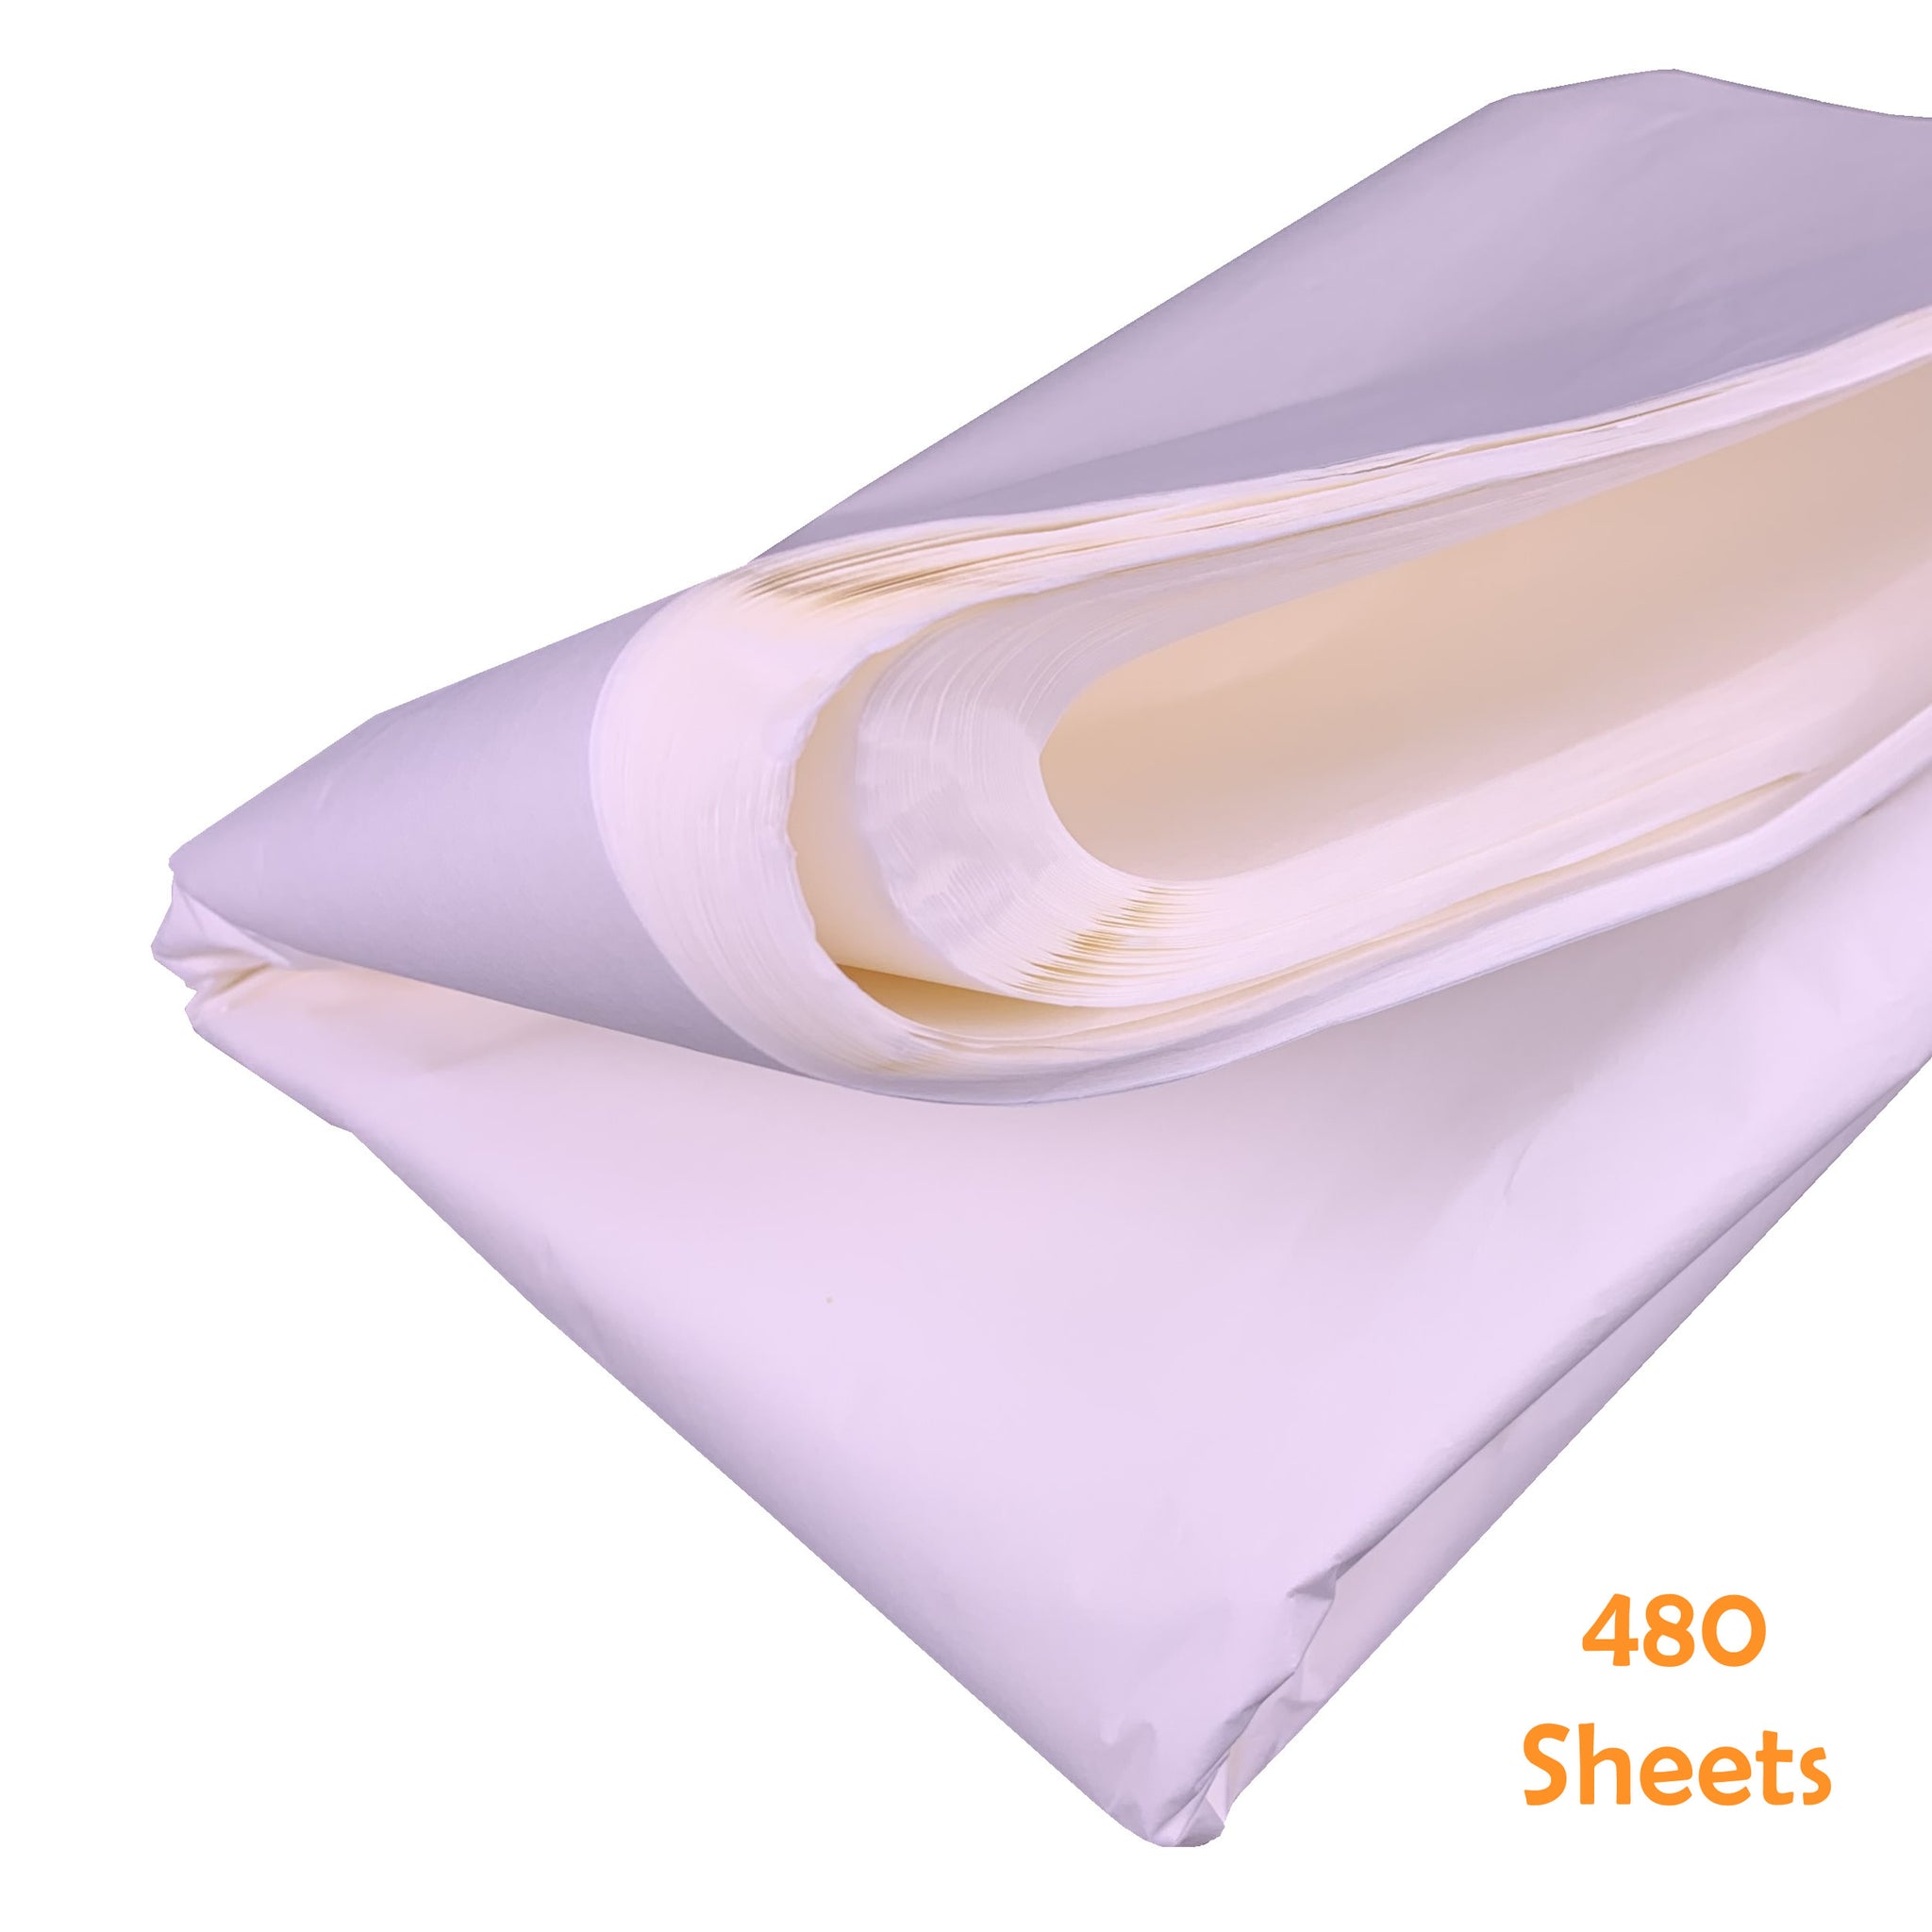  Carnival Papers Wet Strength Tissue Paper 480 Sheets